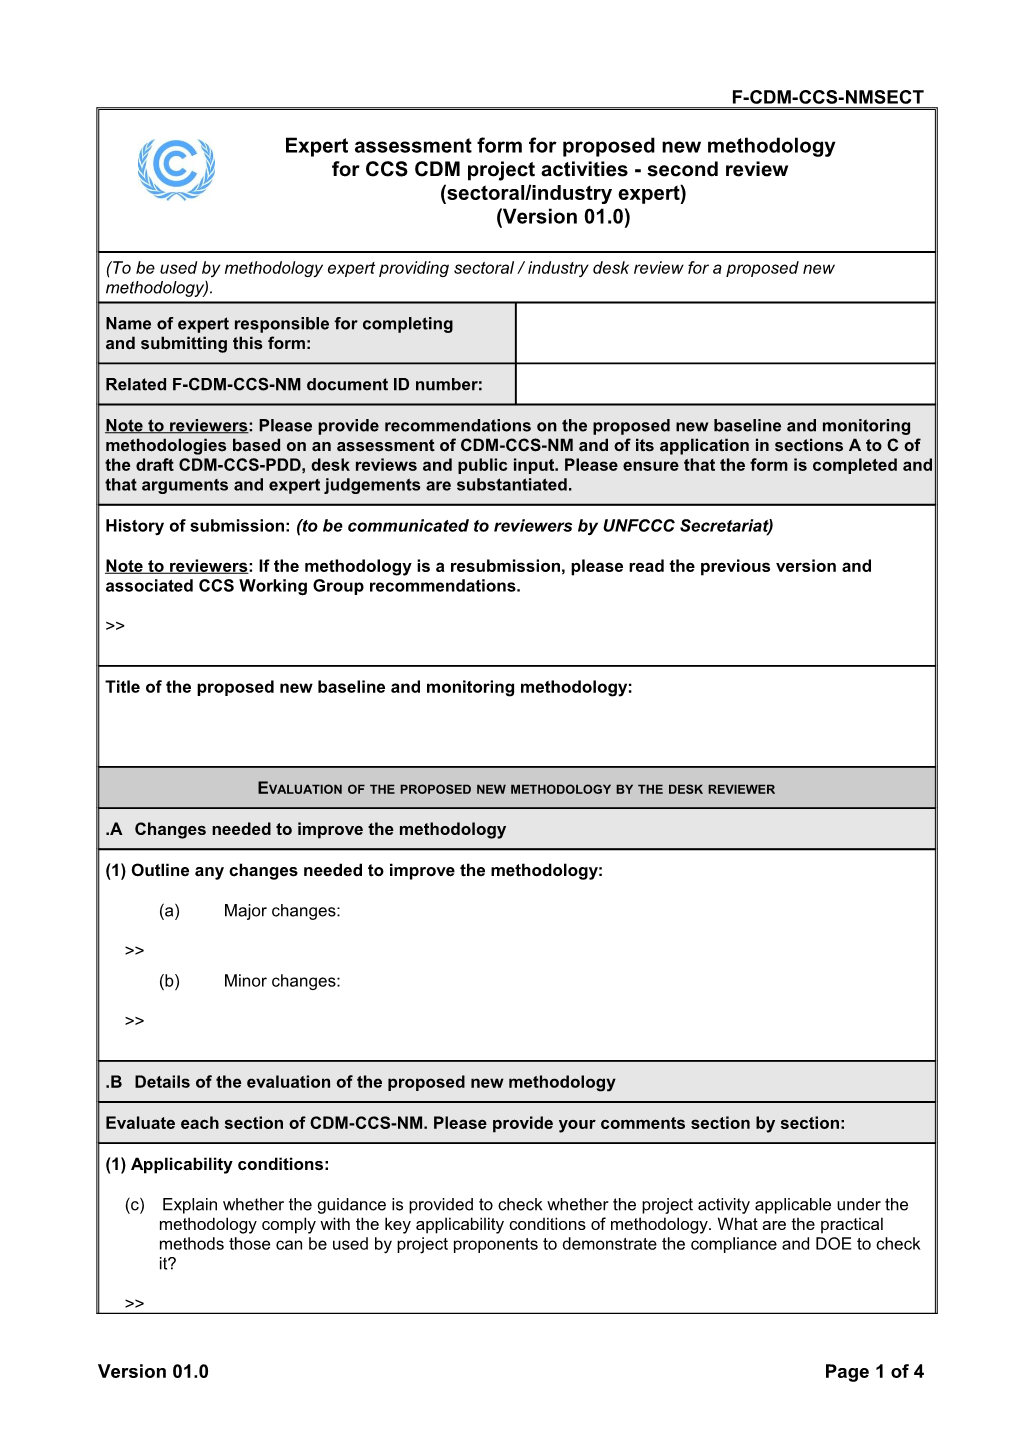 F-CDM-CCS-NMSECT: Expert Assessment Form for Proposed New Methodology for CCSM CDM Project